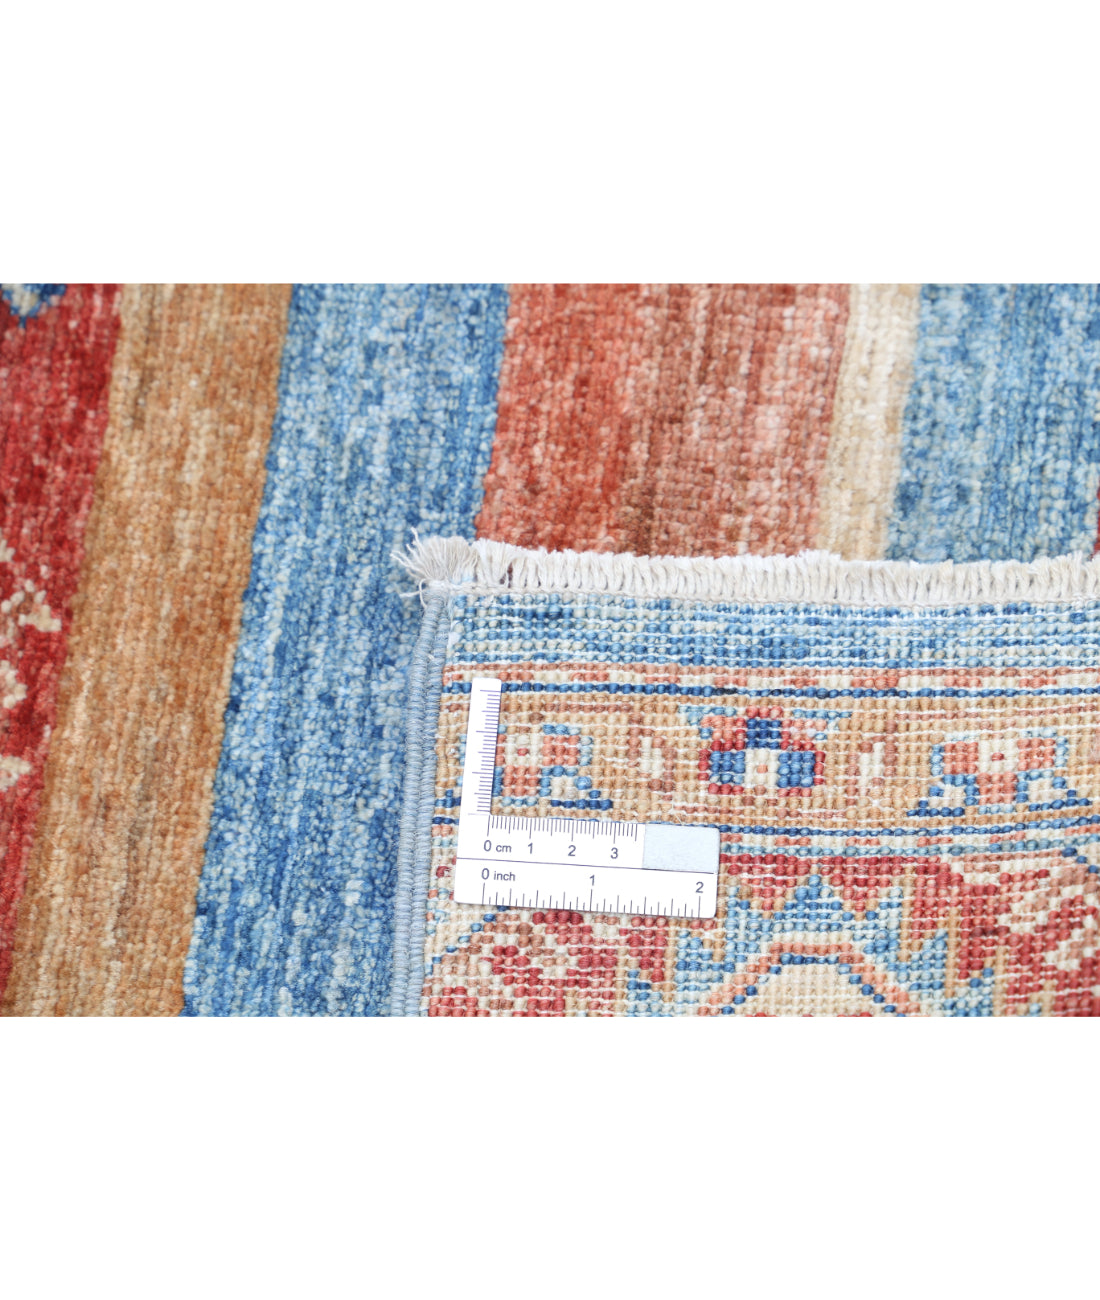 Hand Knotted Khurjeen Wool Rug - 2'0'' x 5'10'' 2'0'' x 5'10'' (60 X 175) / Multi / Multi